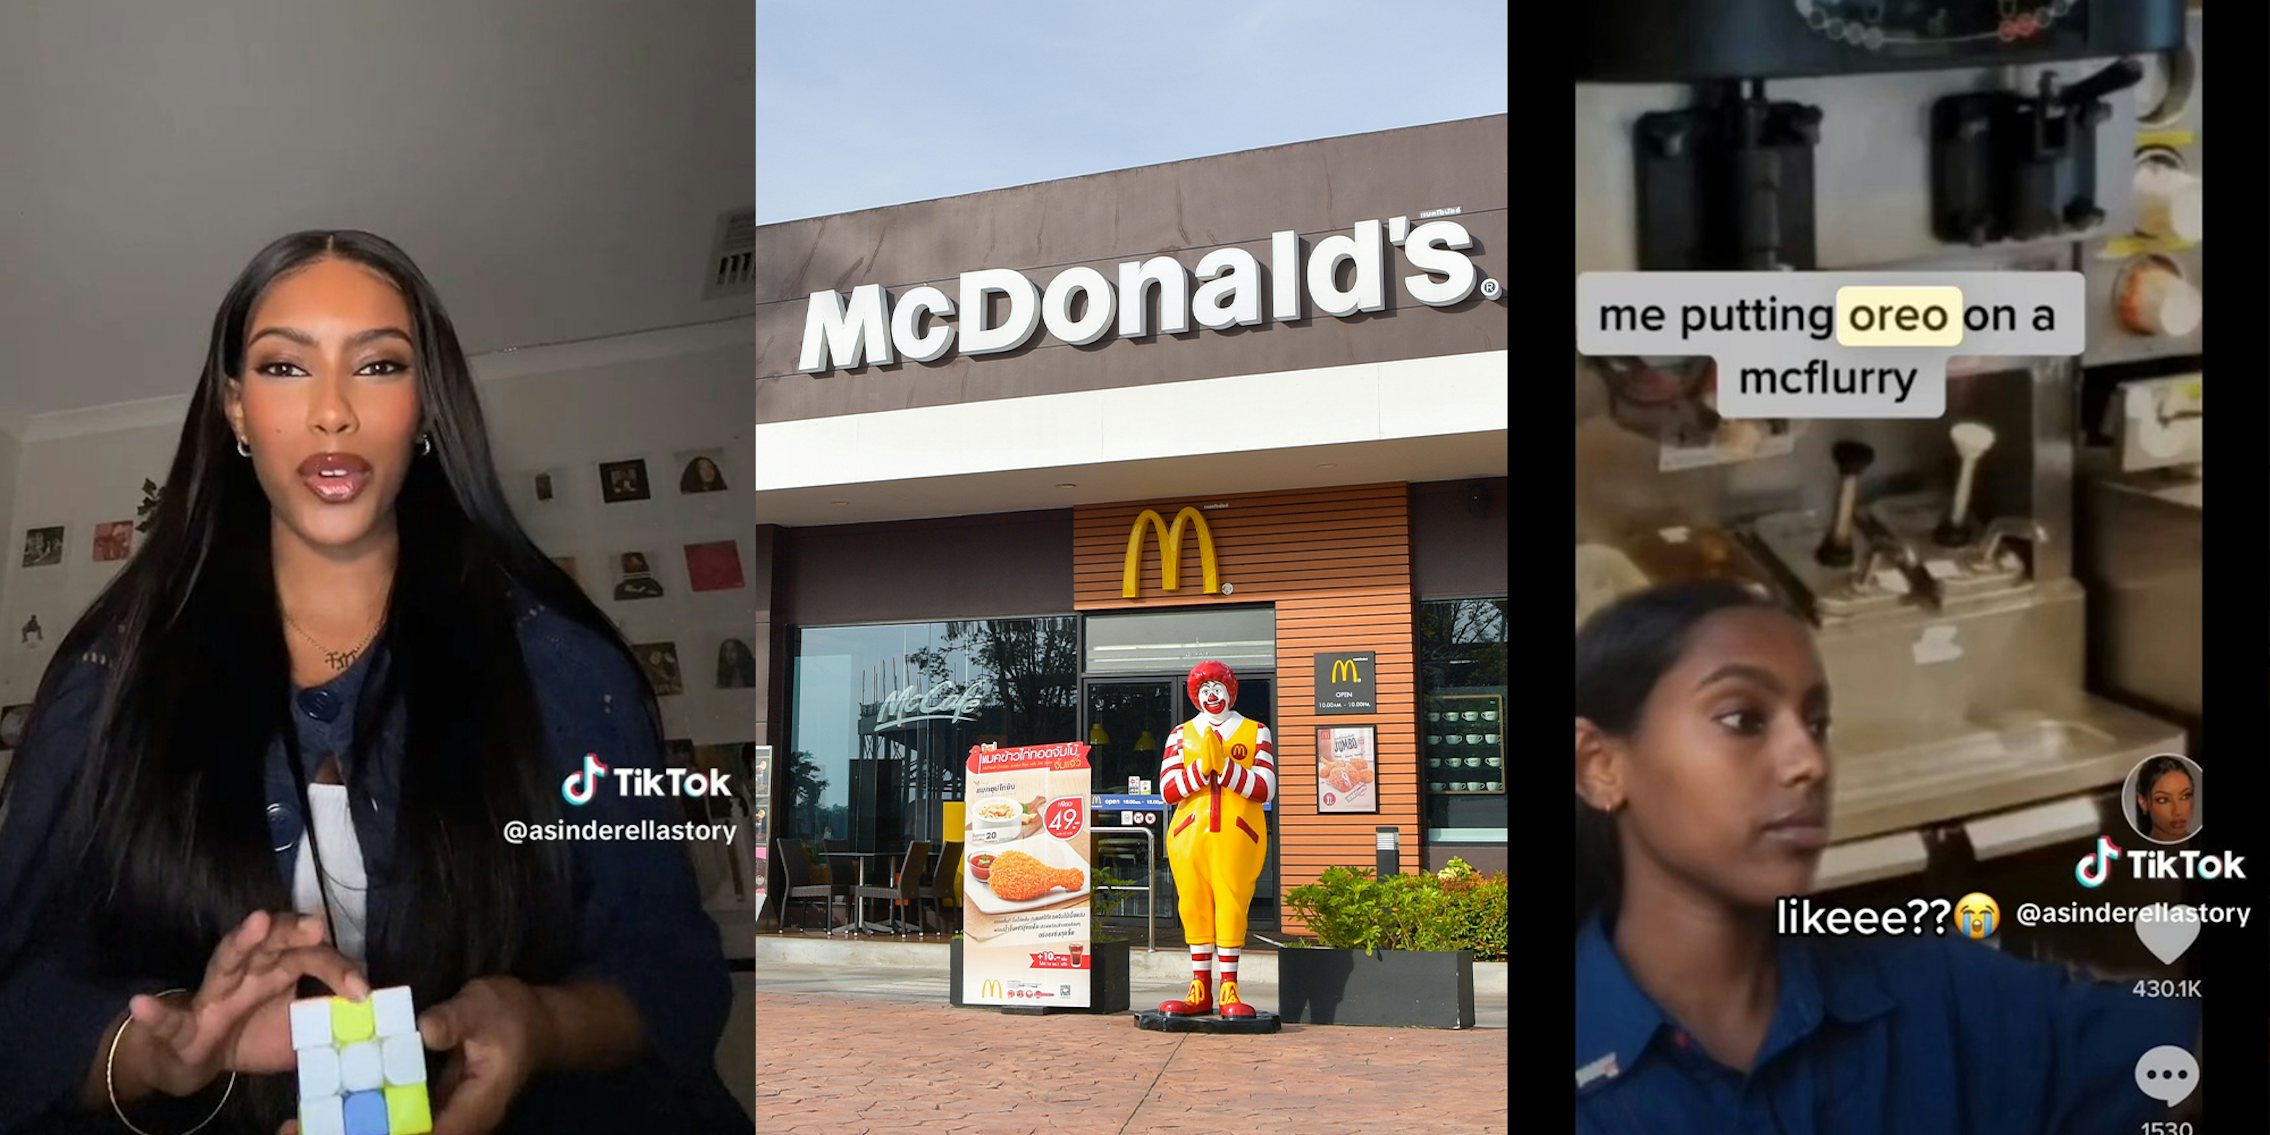 McDonald's employee says she was demoted 'over an Oreo McFlurry'